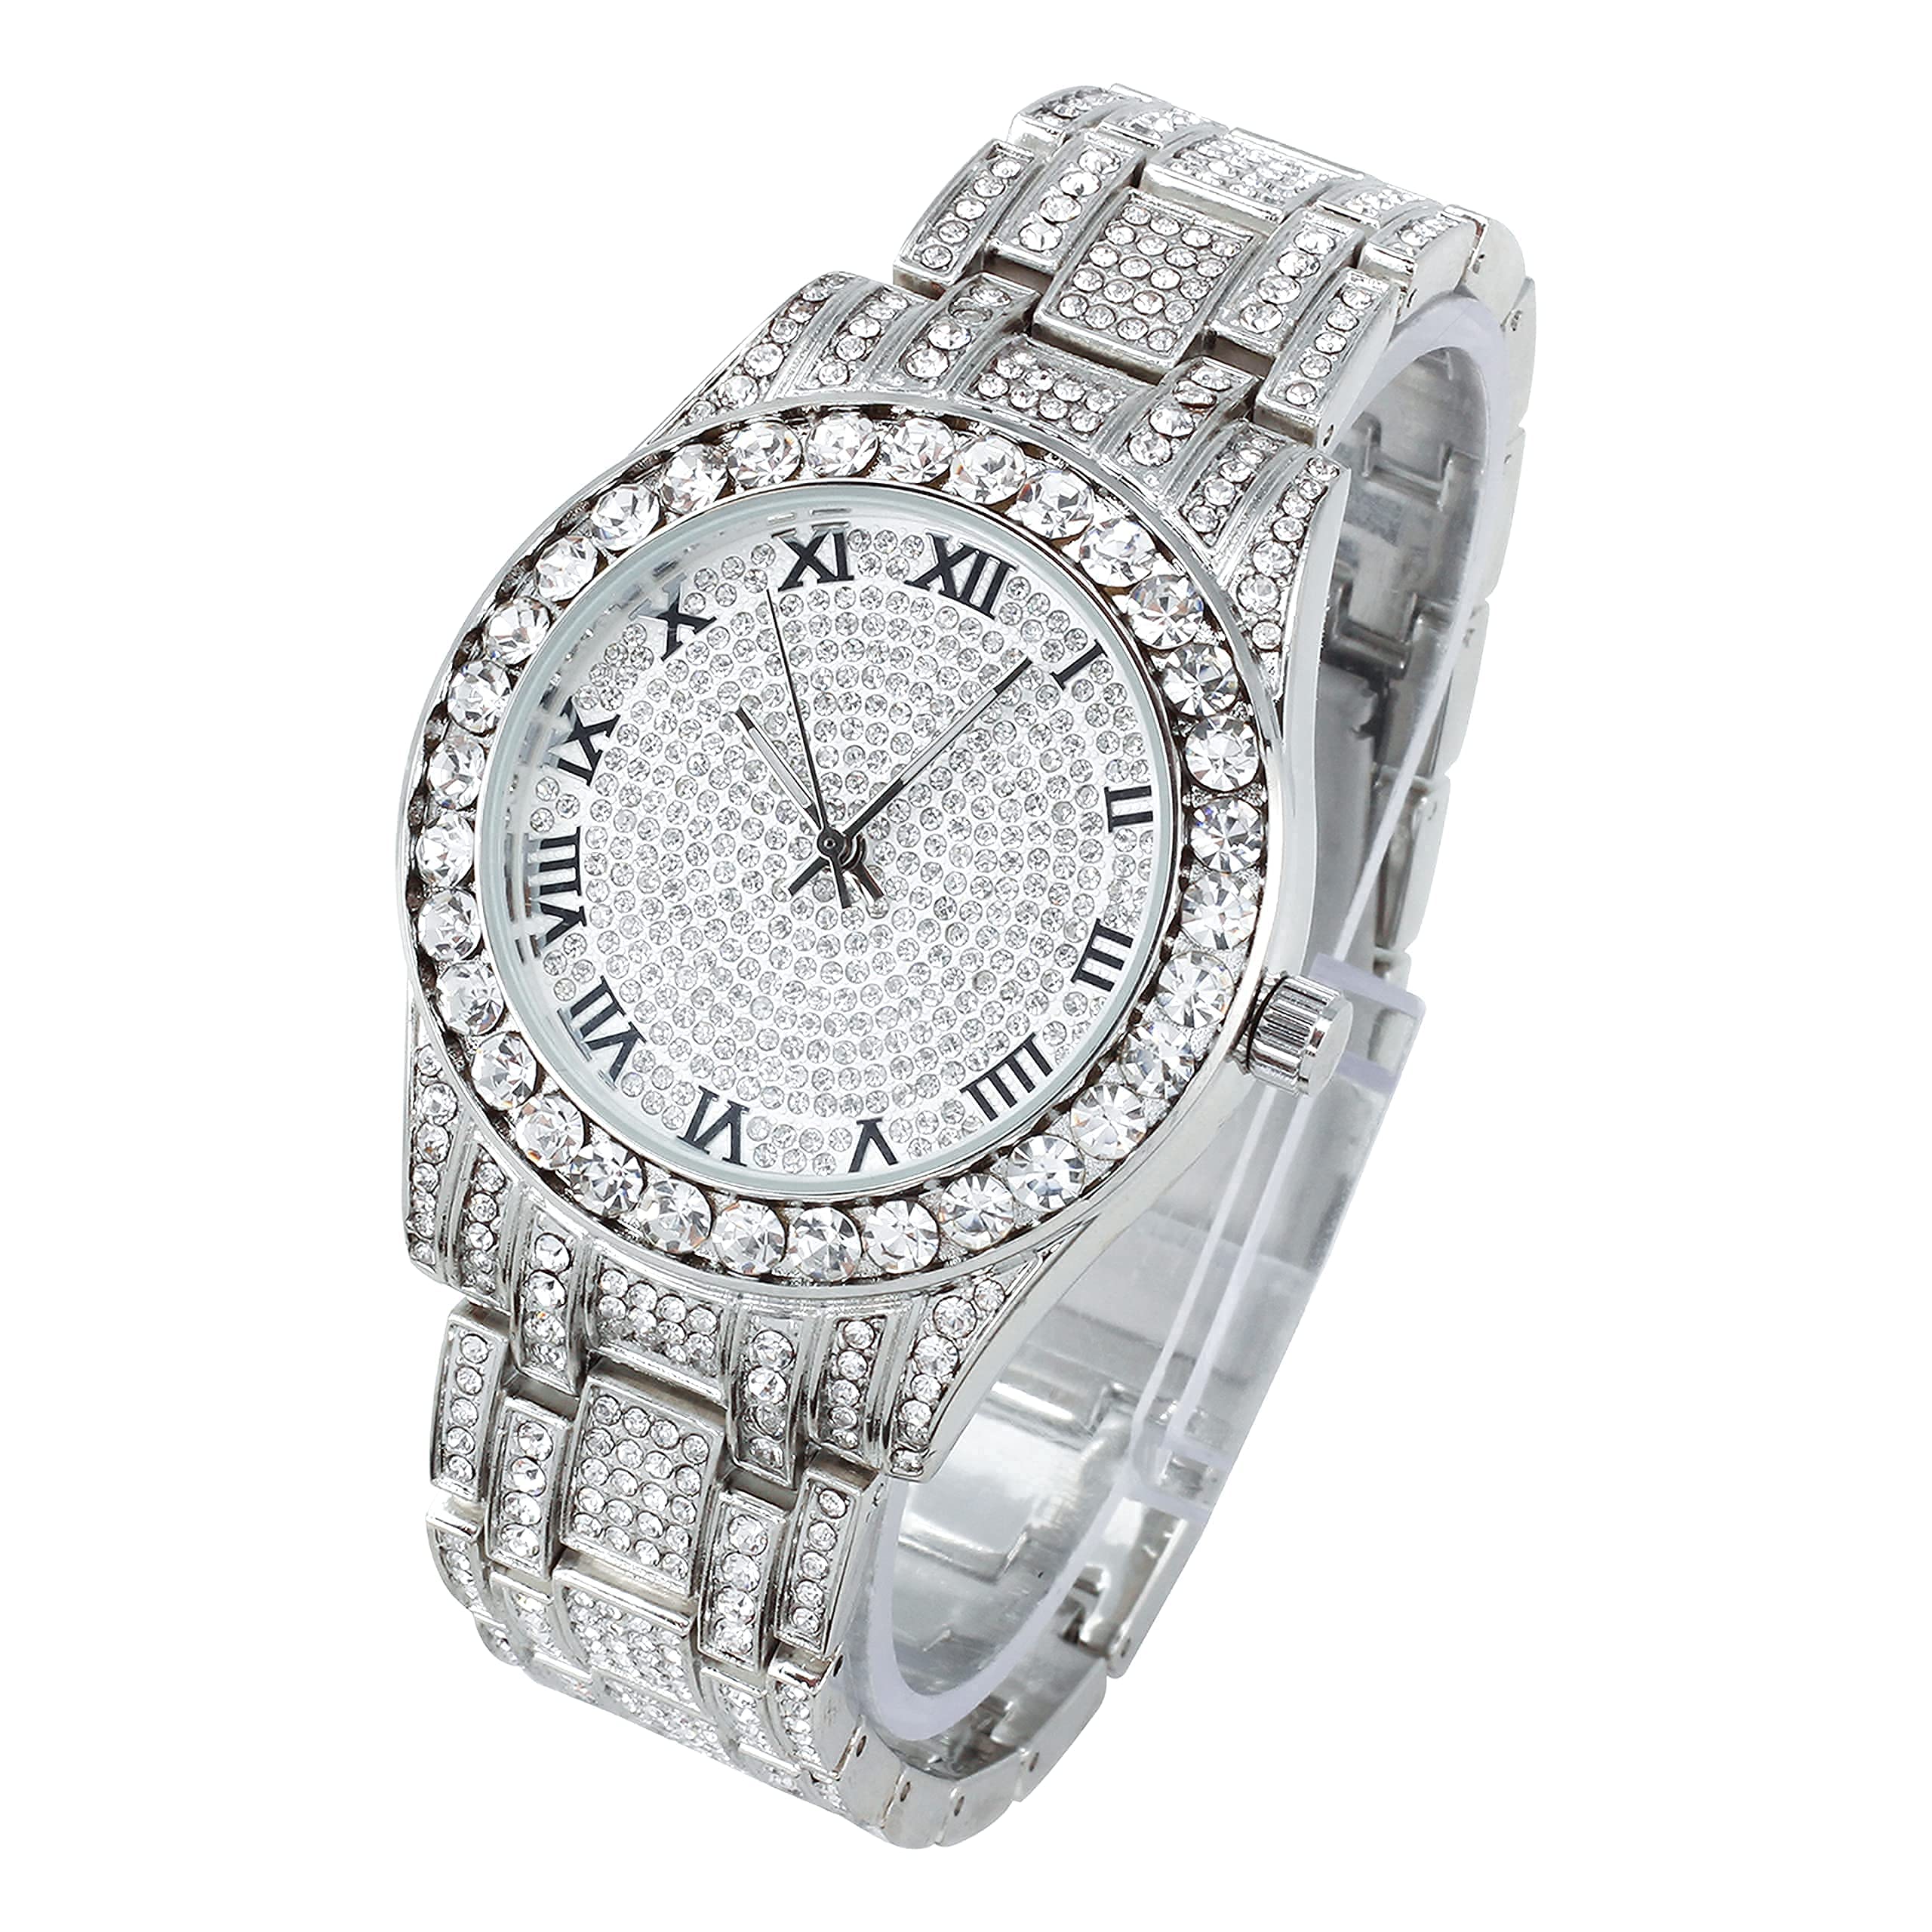 Women's Round Iced Out Watch 40mm Silver - Roman Dial